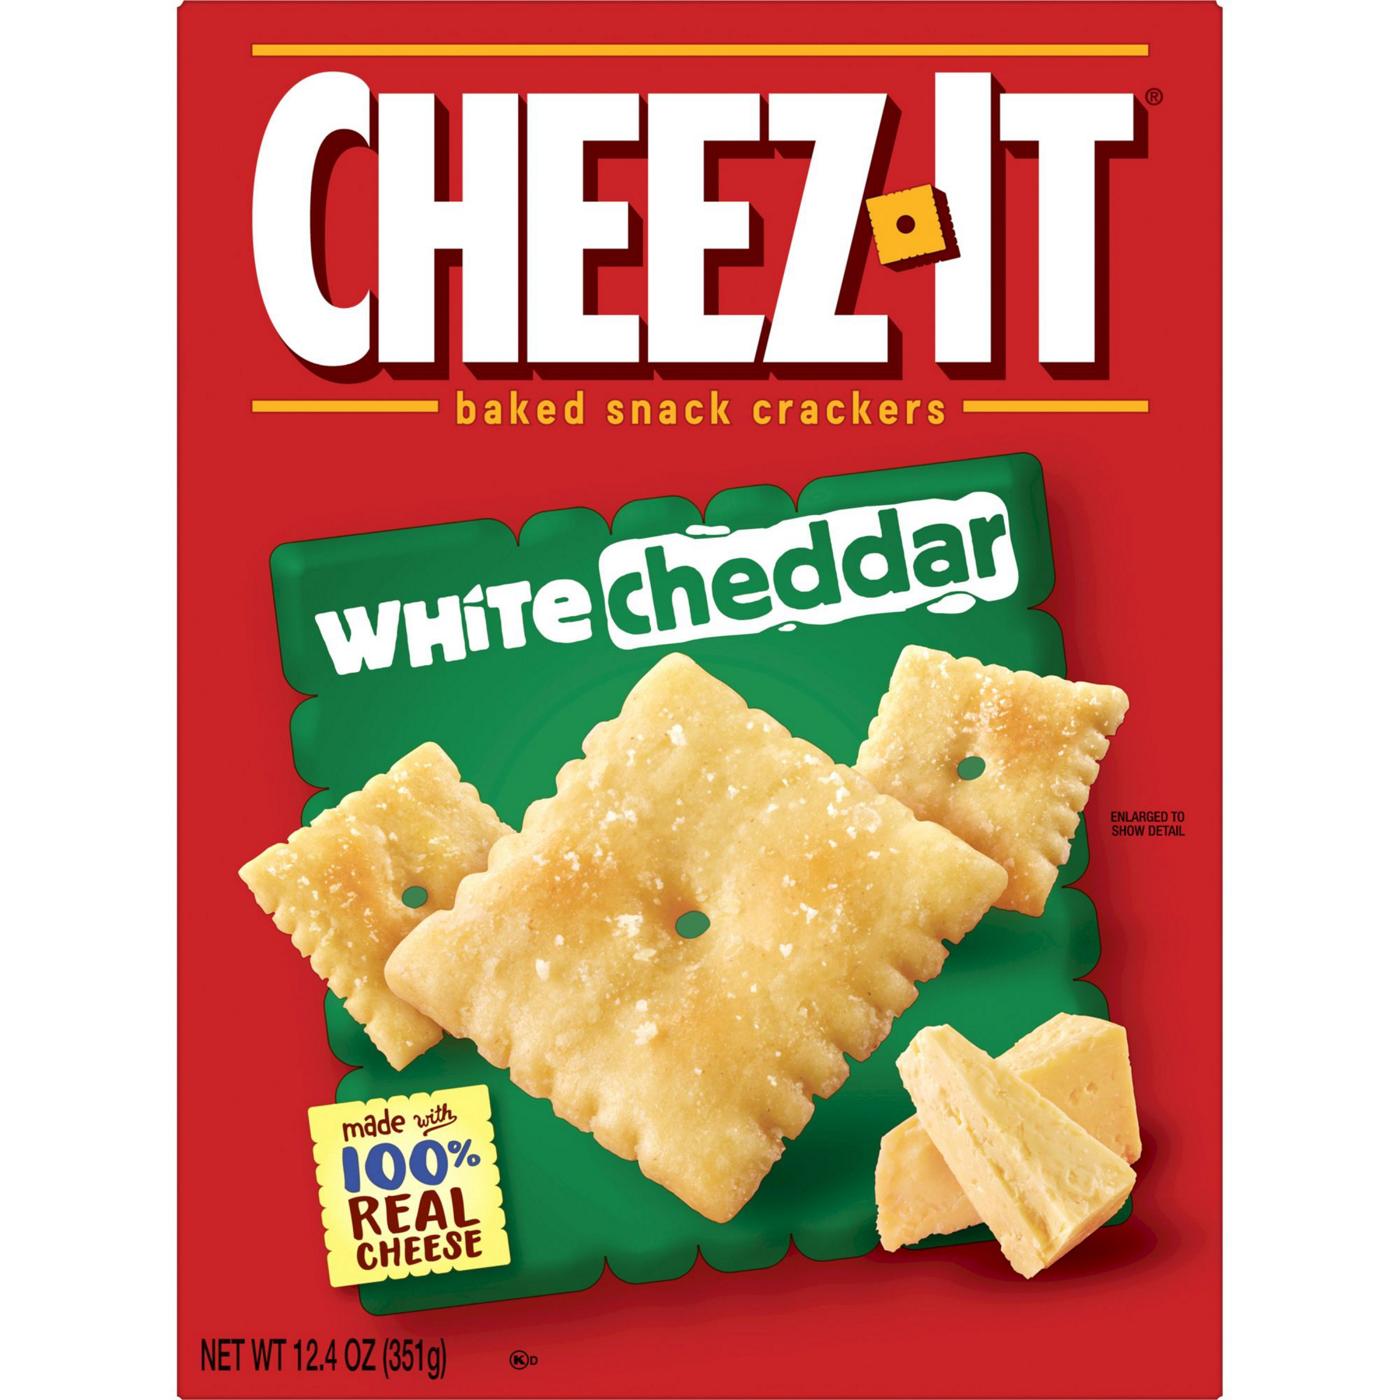 CheezIt Baked Snack Cheese Crackers White Cheddar Shop Crackers